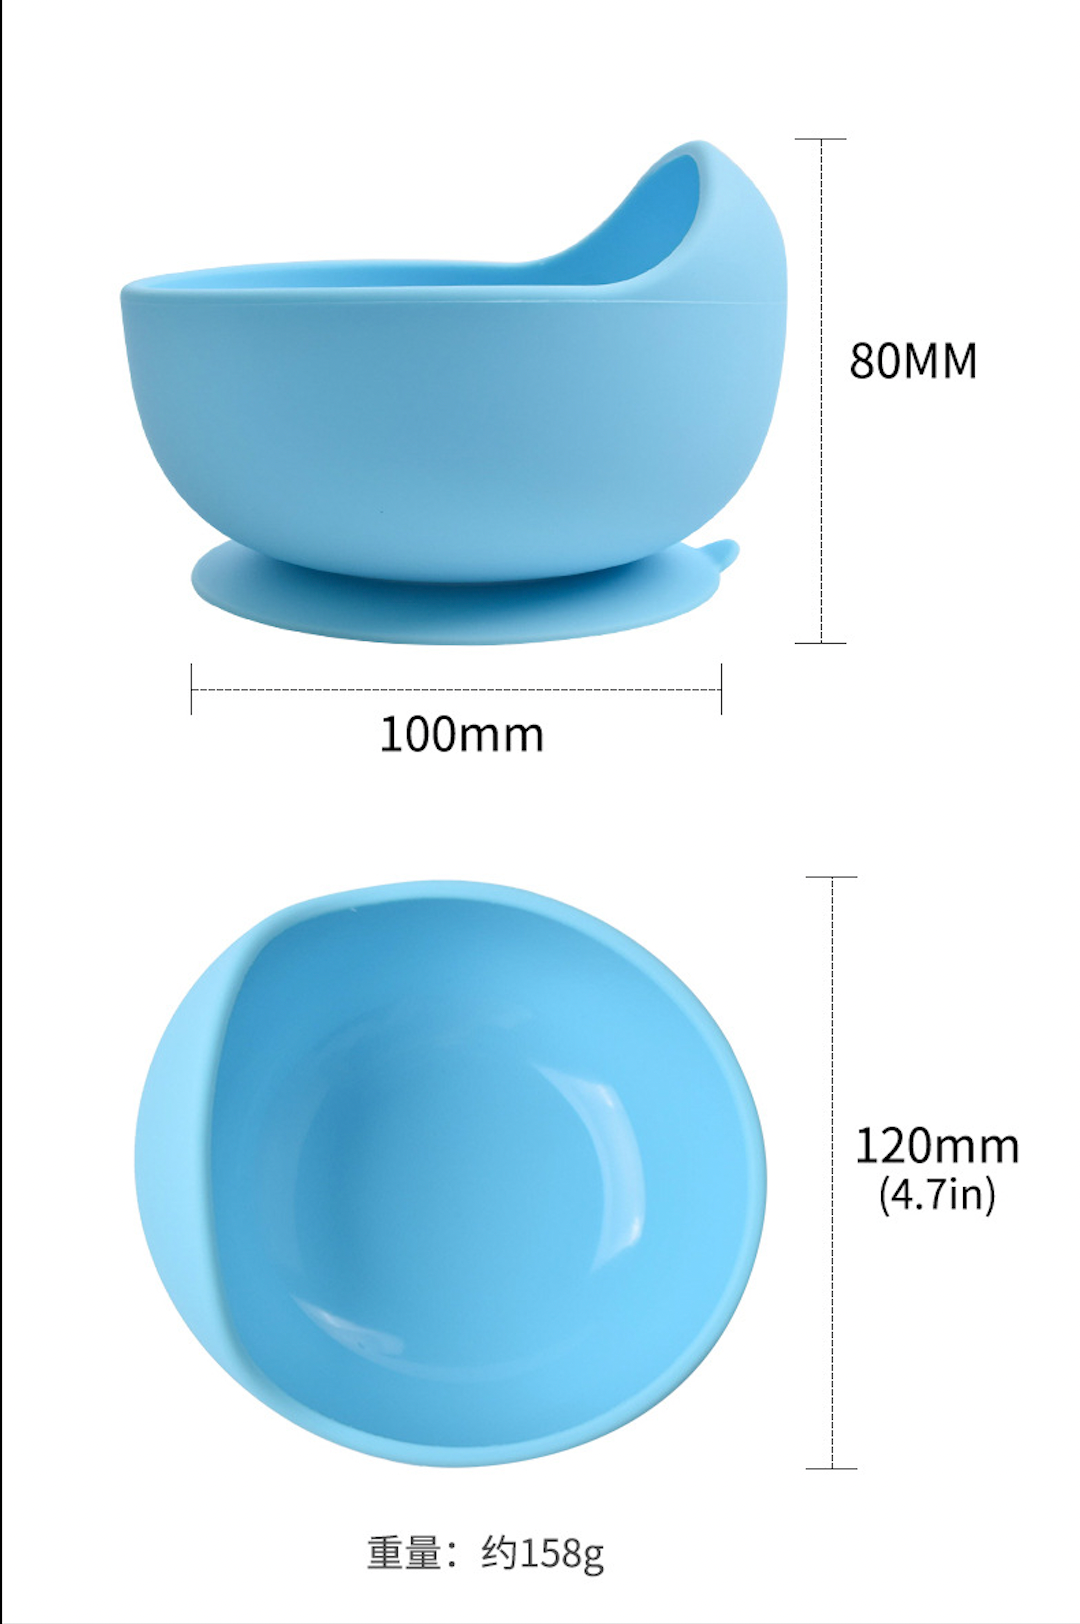 Silicone baby feeding tableware newest design, baby eating training, complementary food bowls, spoons, silicone suction cups, baby bowls